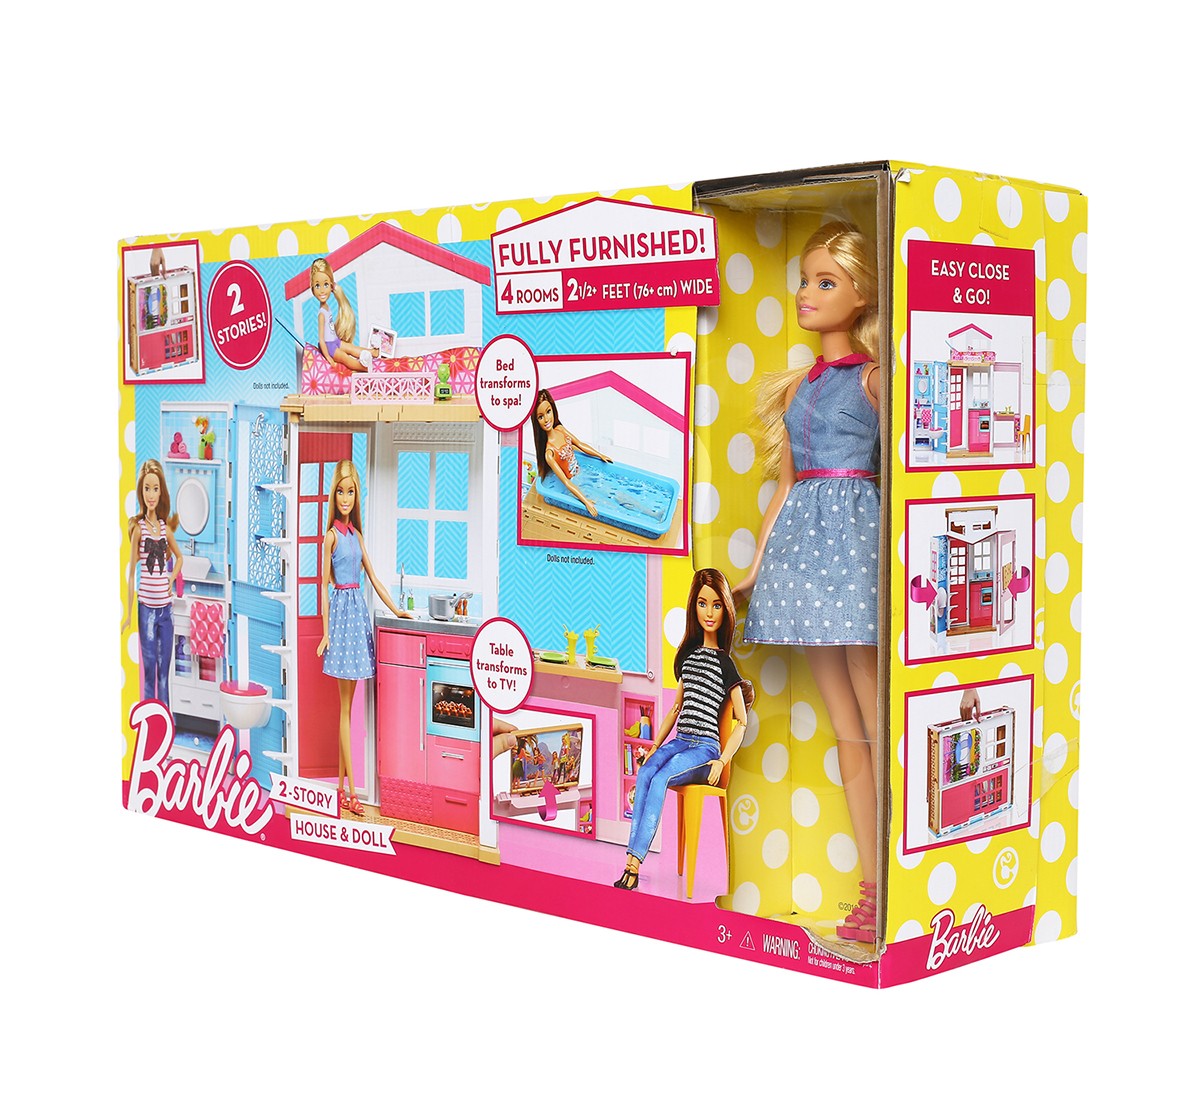 Barbie 2 Story House And Doll, Multi Color Doll House & Accessories for age 3Y+ 